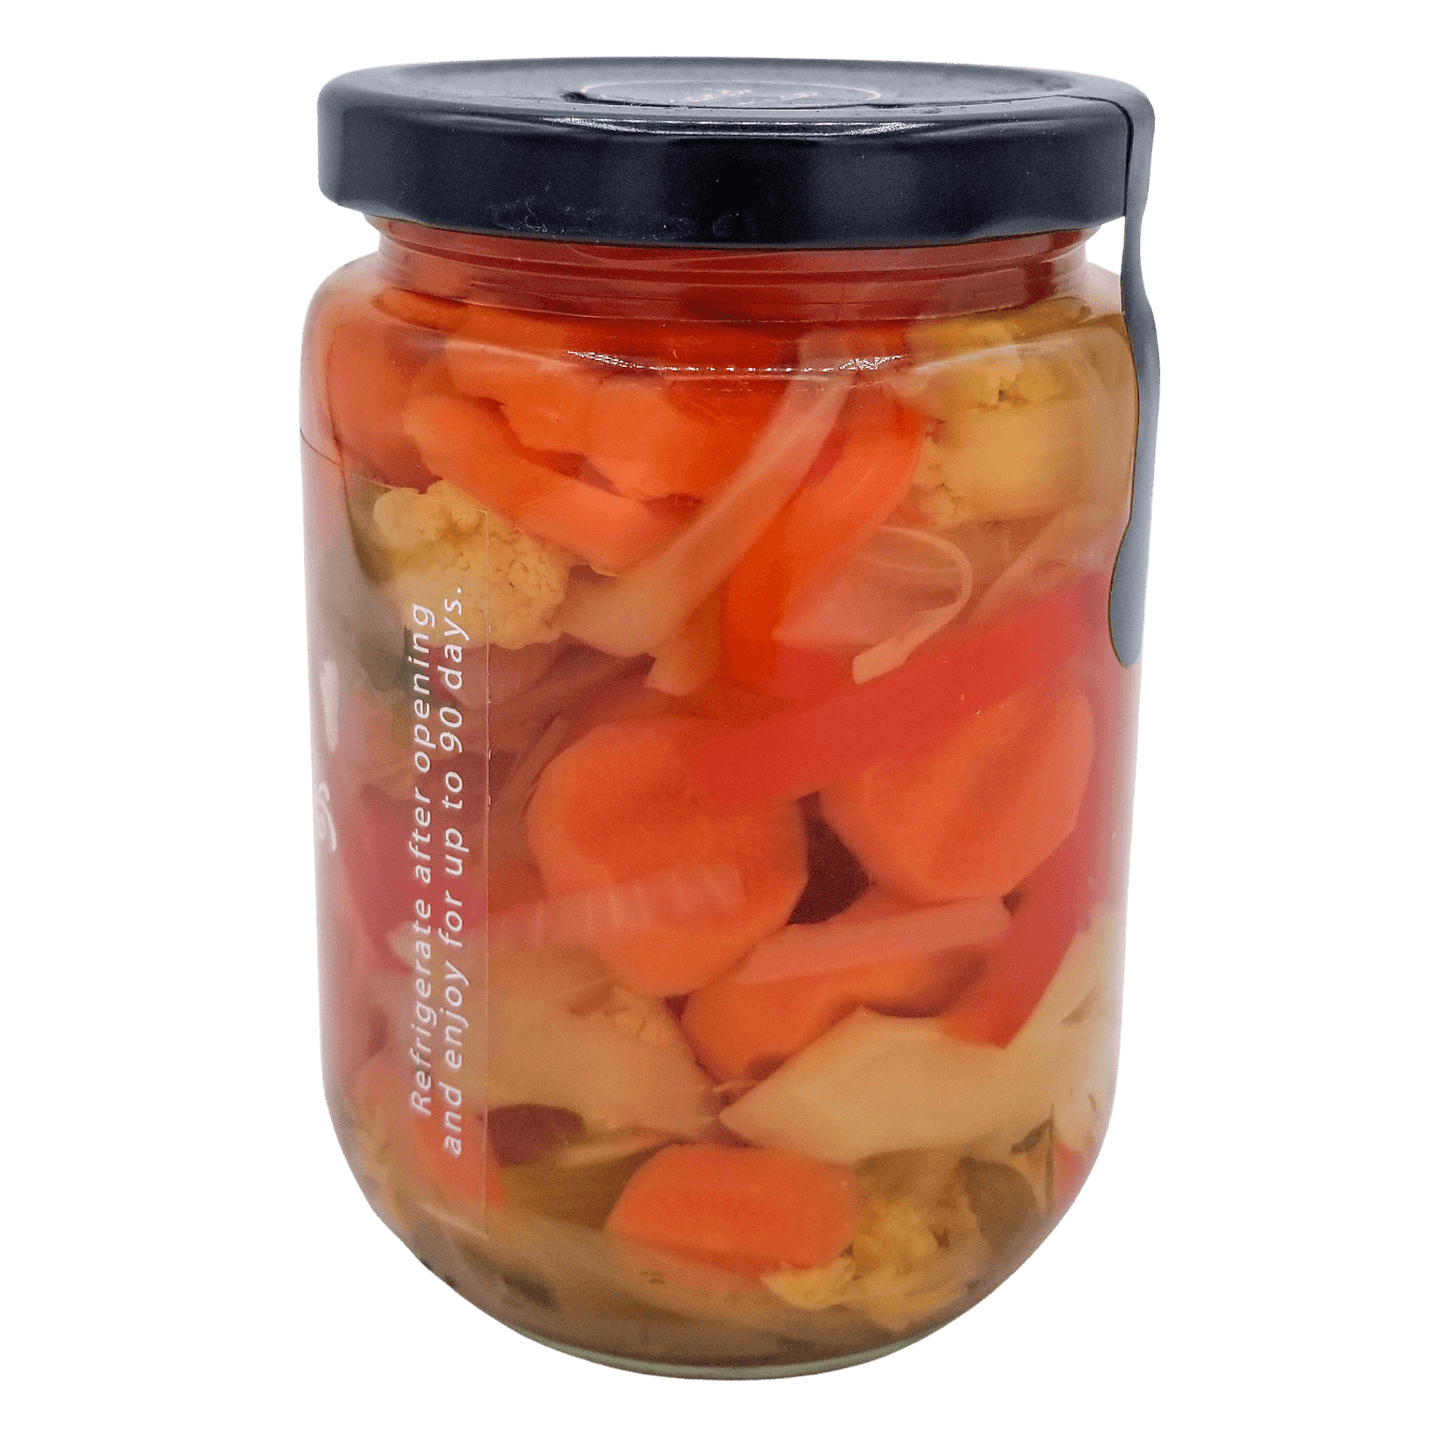 Our Pickled Garden Mixed Pickled Vegetables